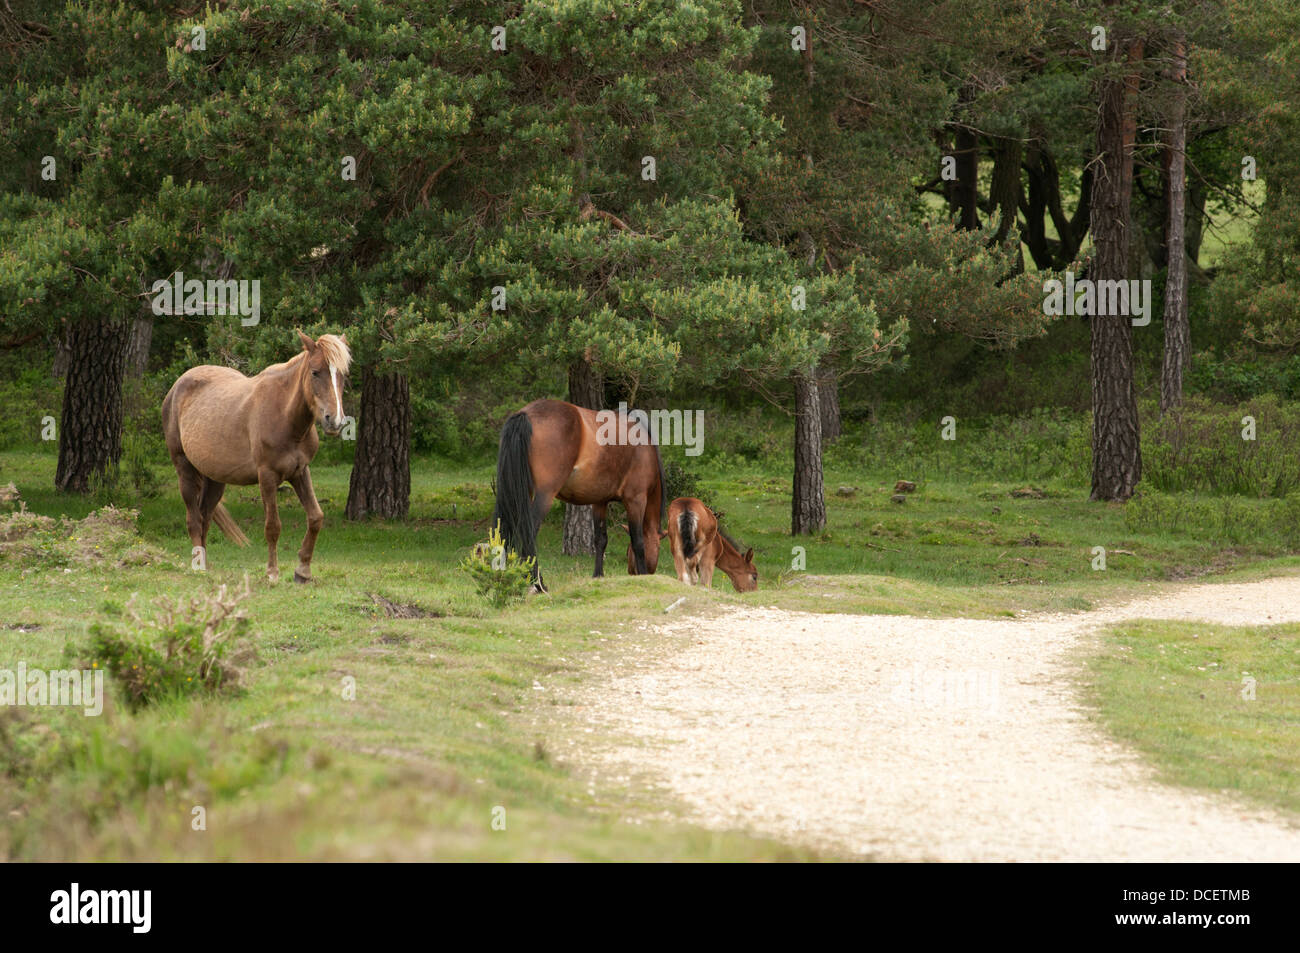 Ponies grazing among some trees in The New Forest, England. Stock Photo